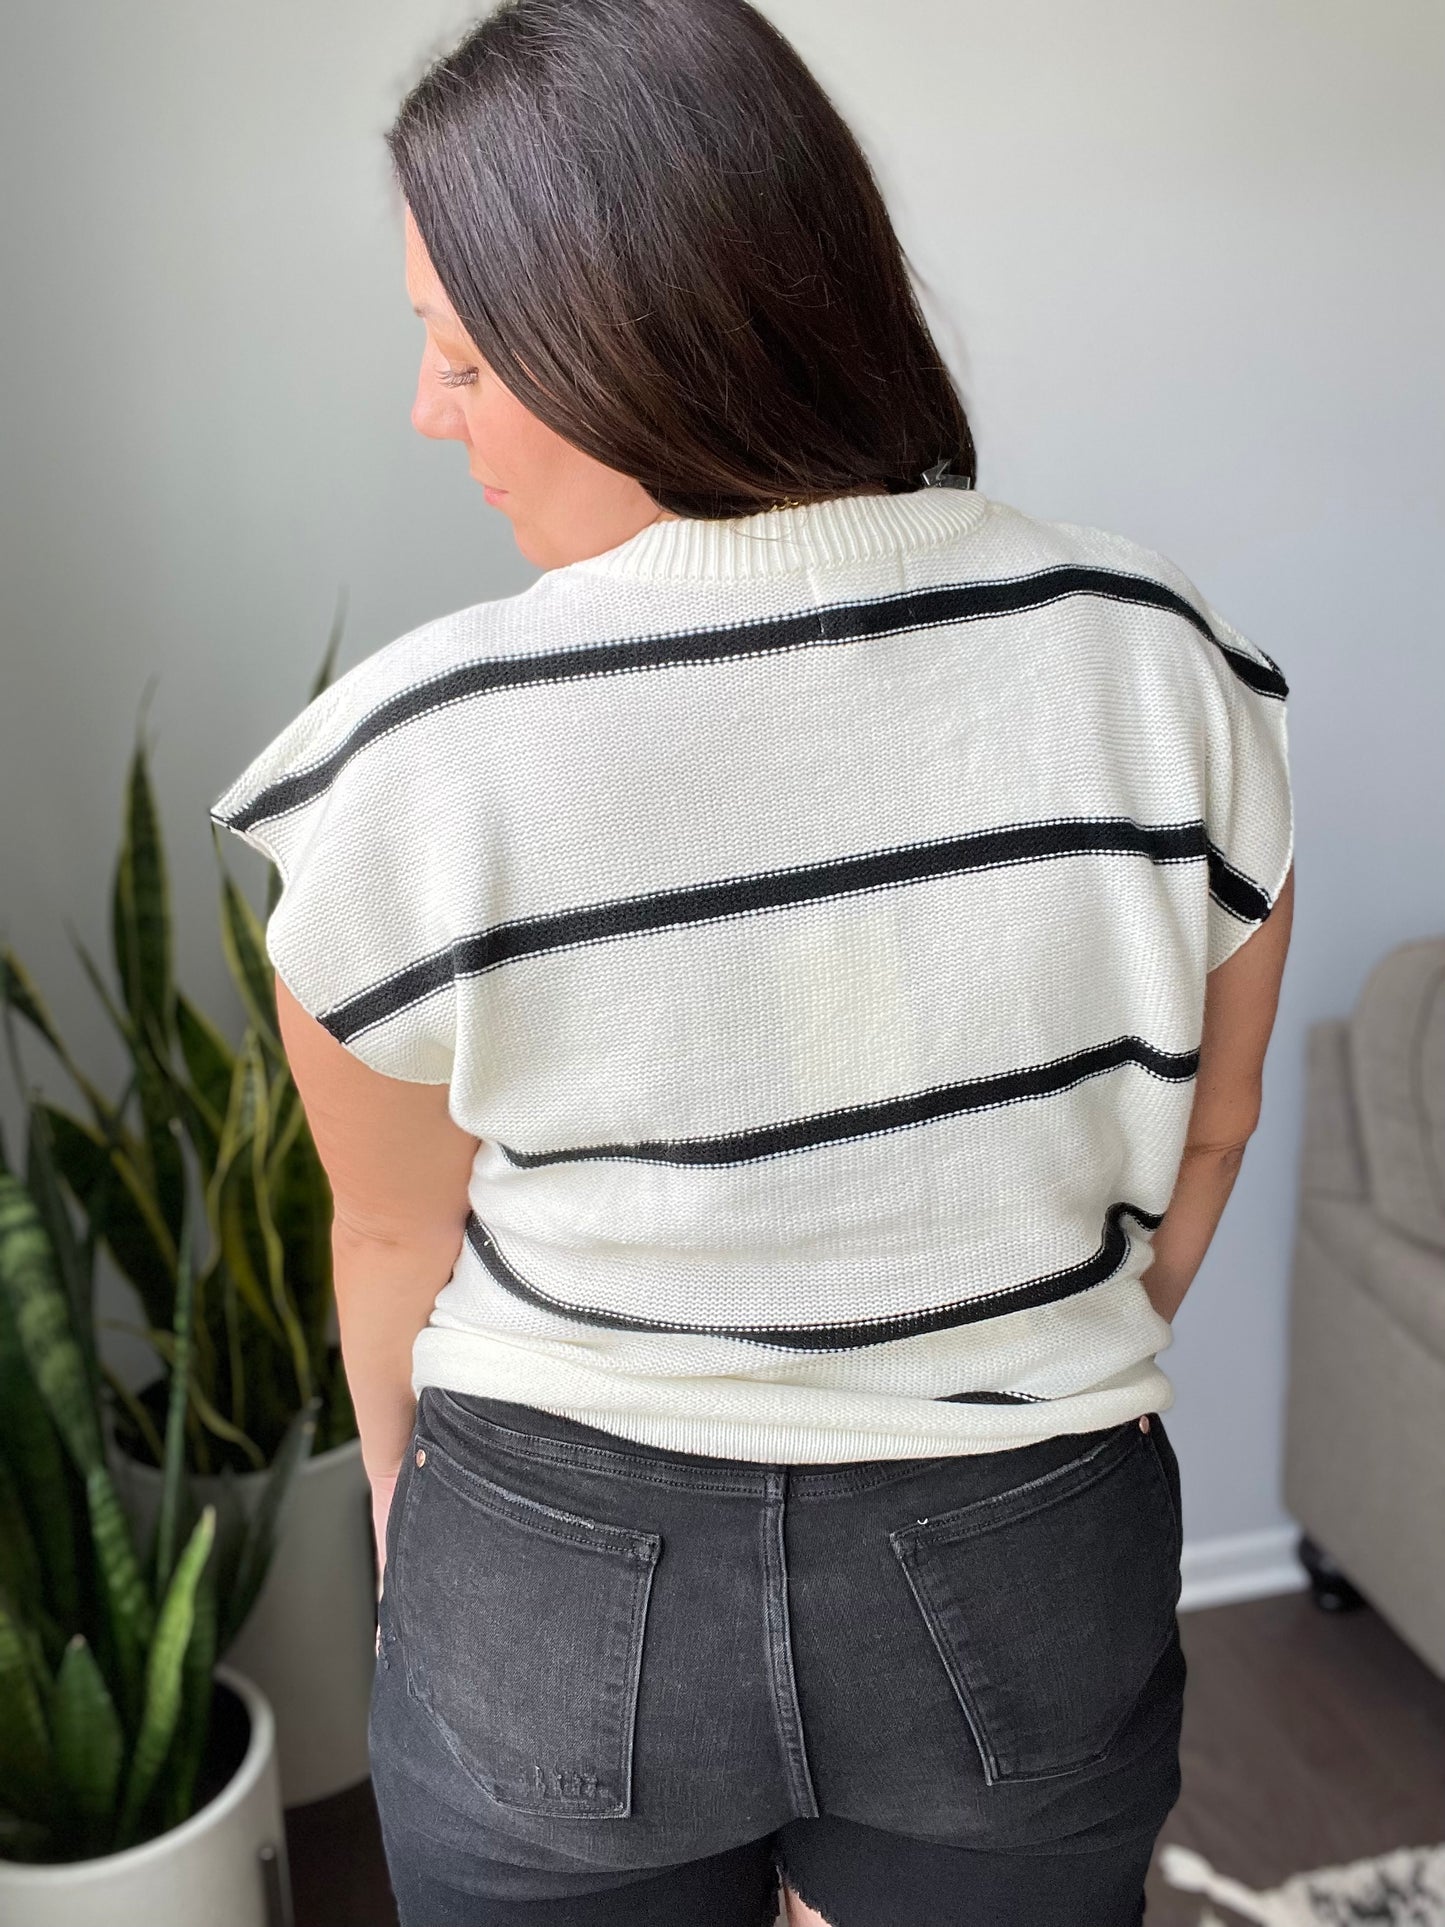 More or Less Striped Sleeveless Sweater